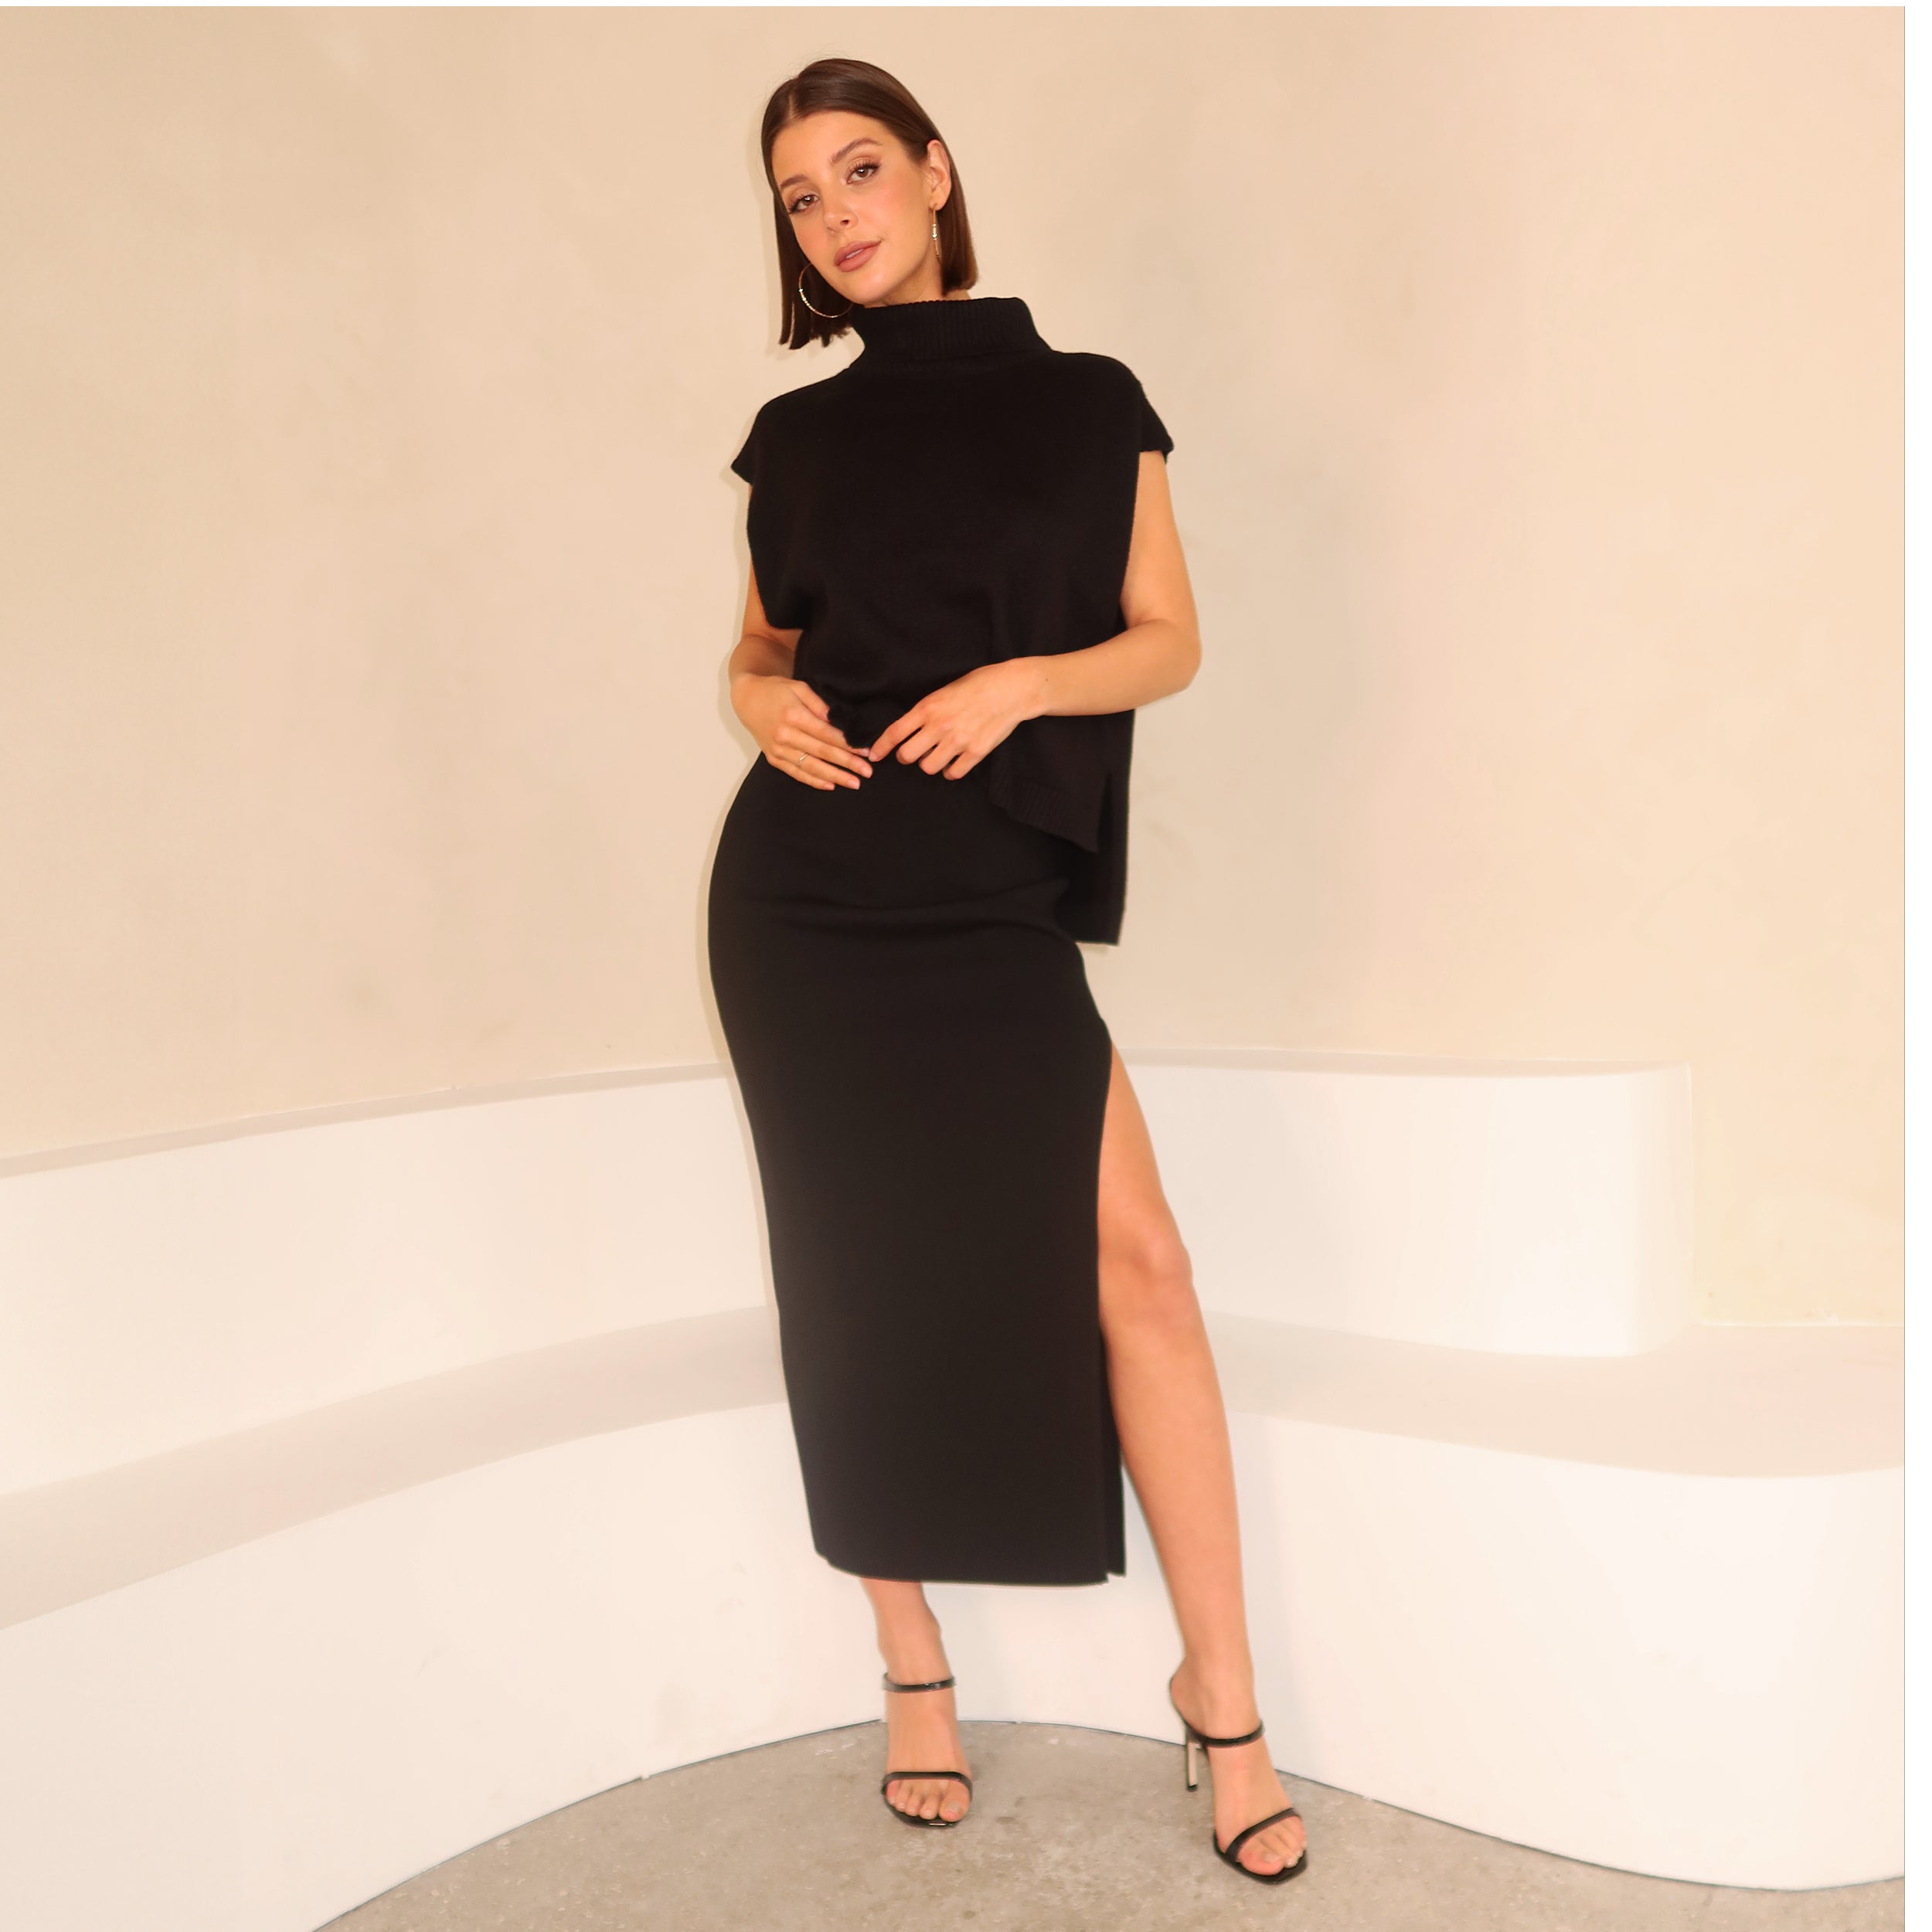 Full body view of woman wearing black sleeveless sweater and midi skirt with side slit